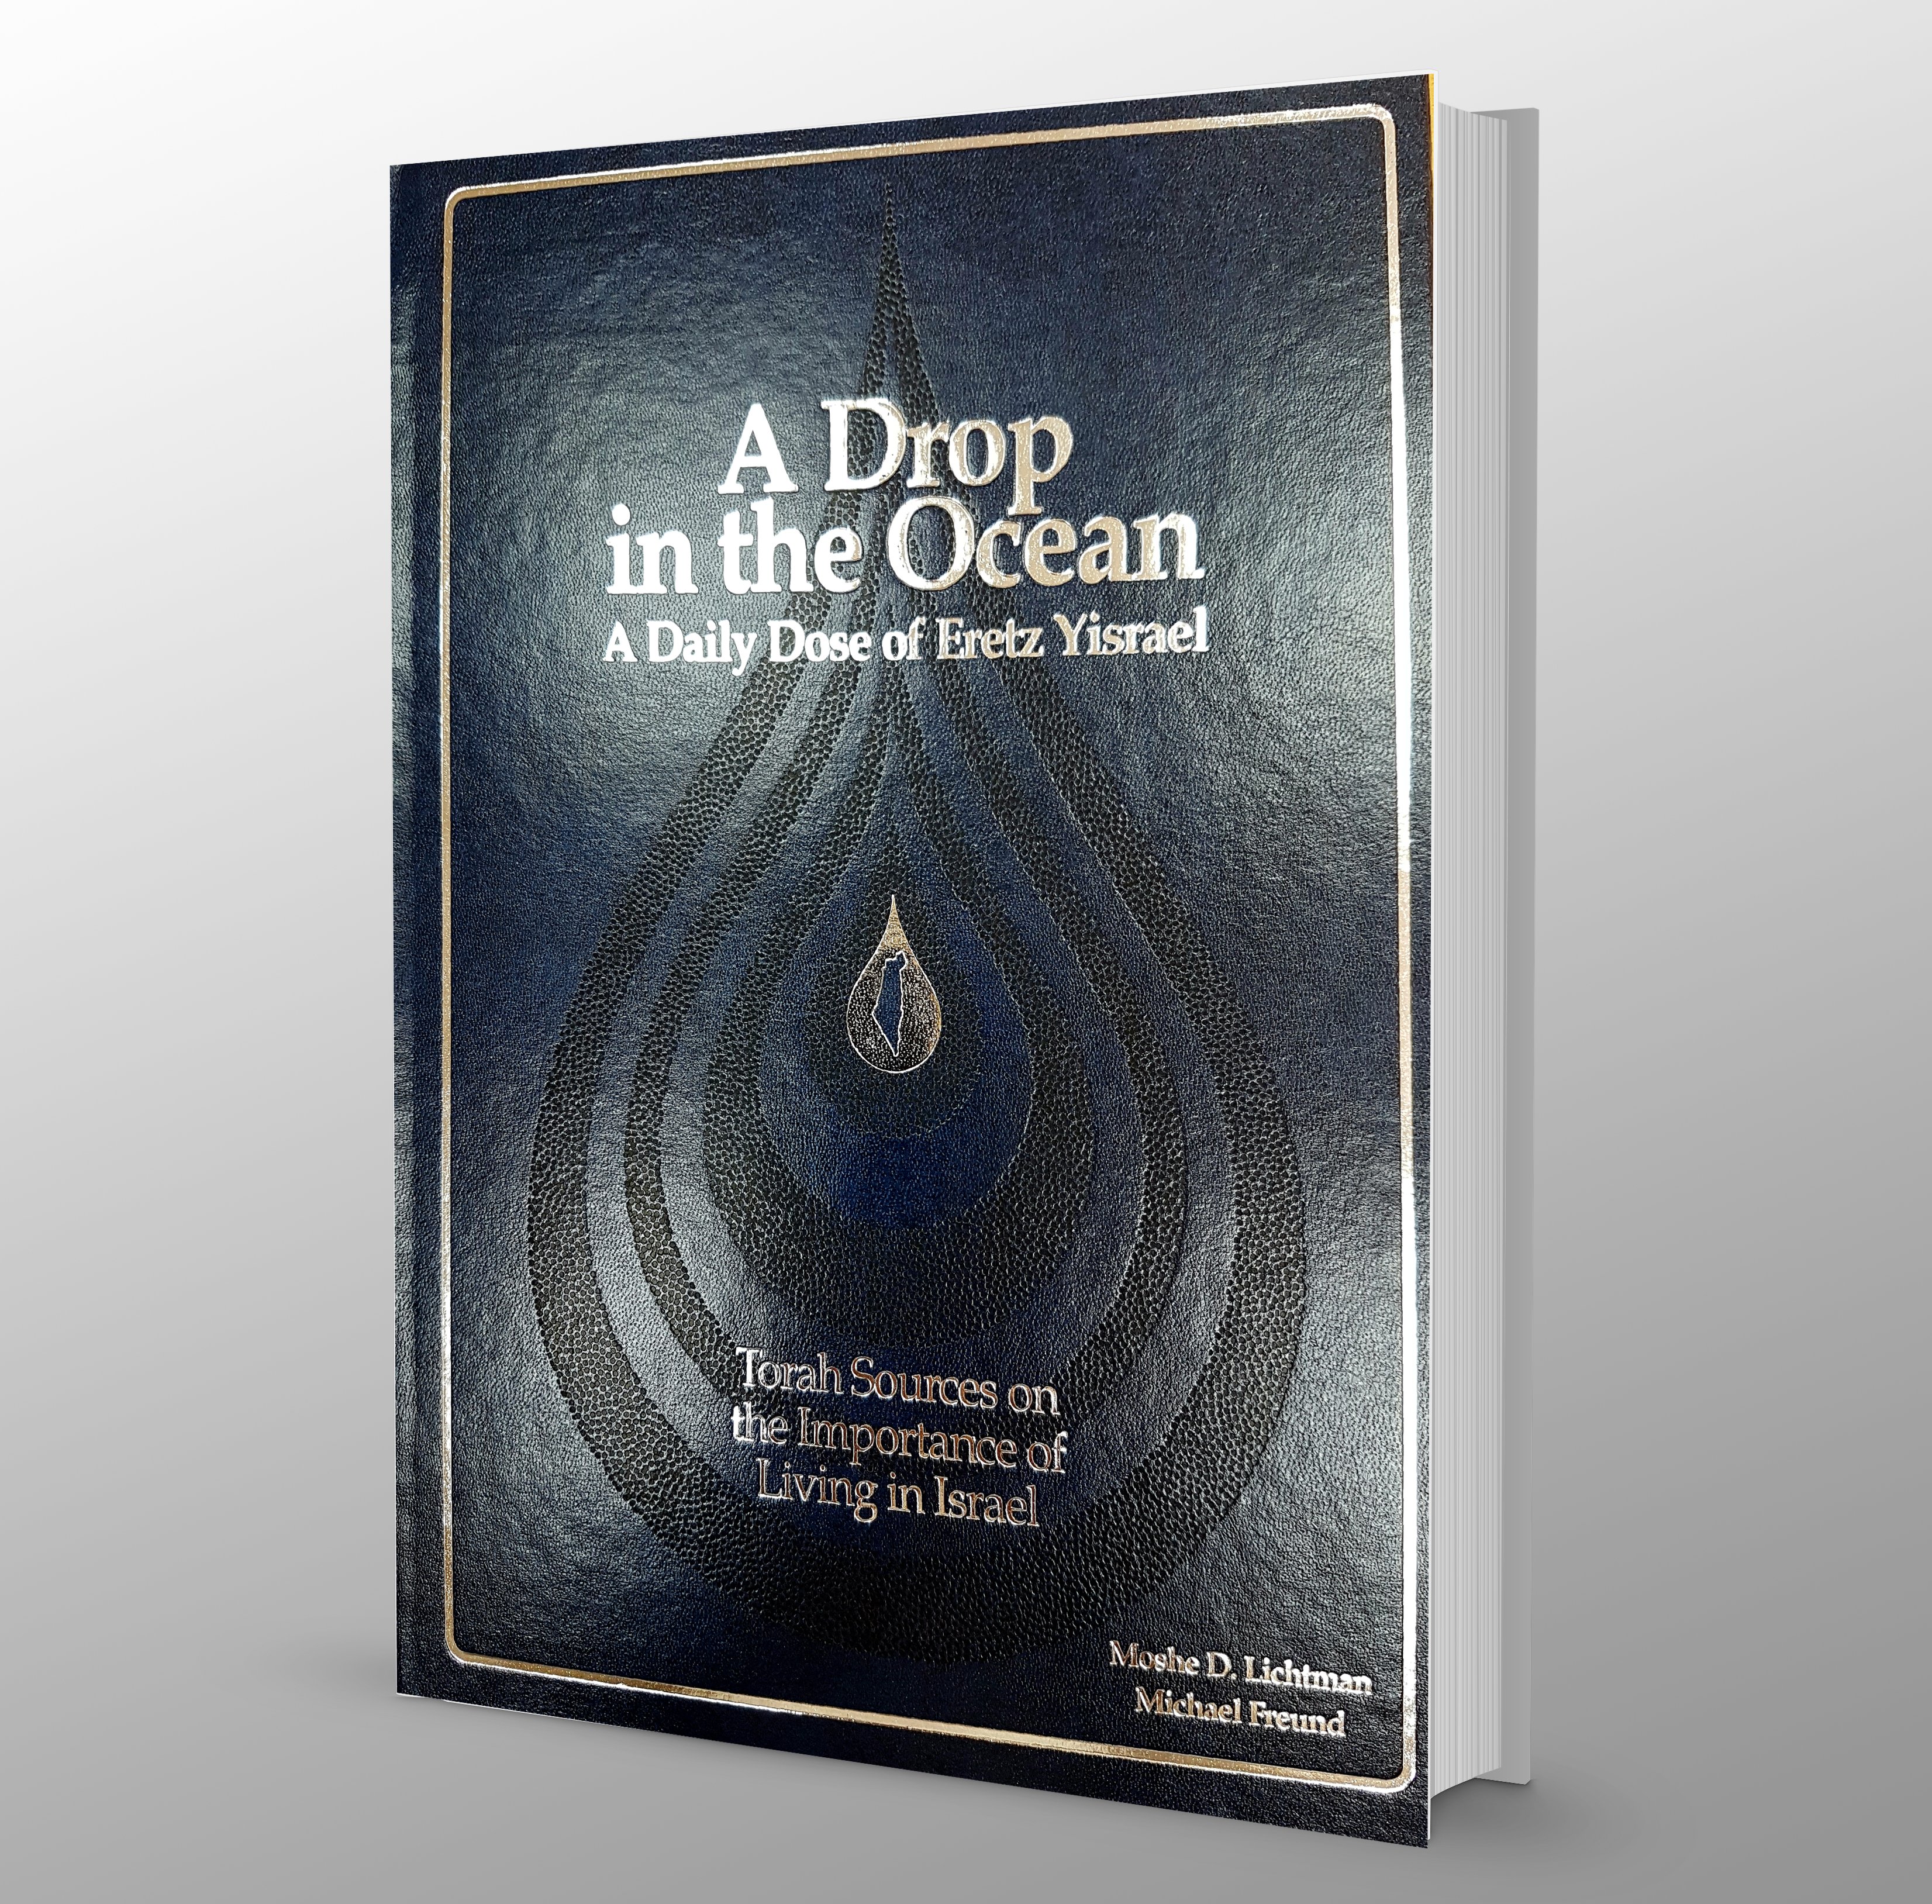 A Drop in the Ocean: A Daily Dose of Eretz Yisrael